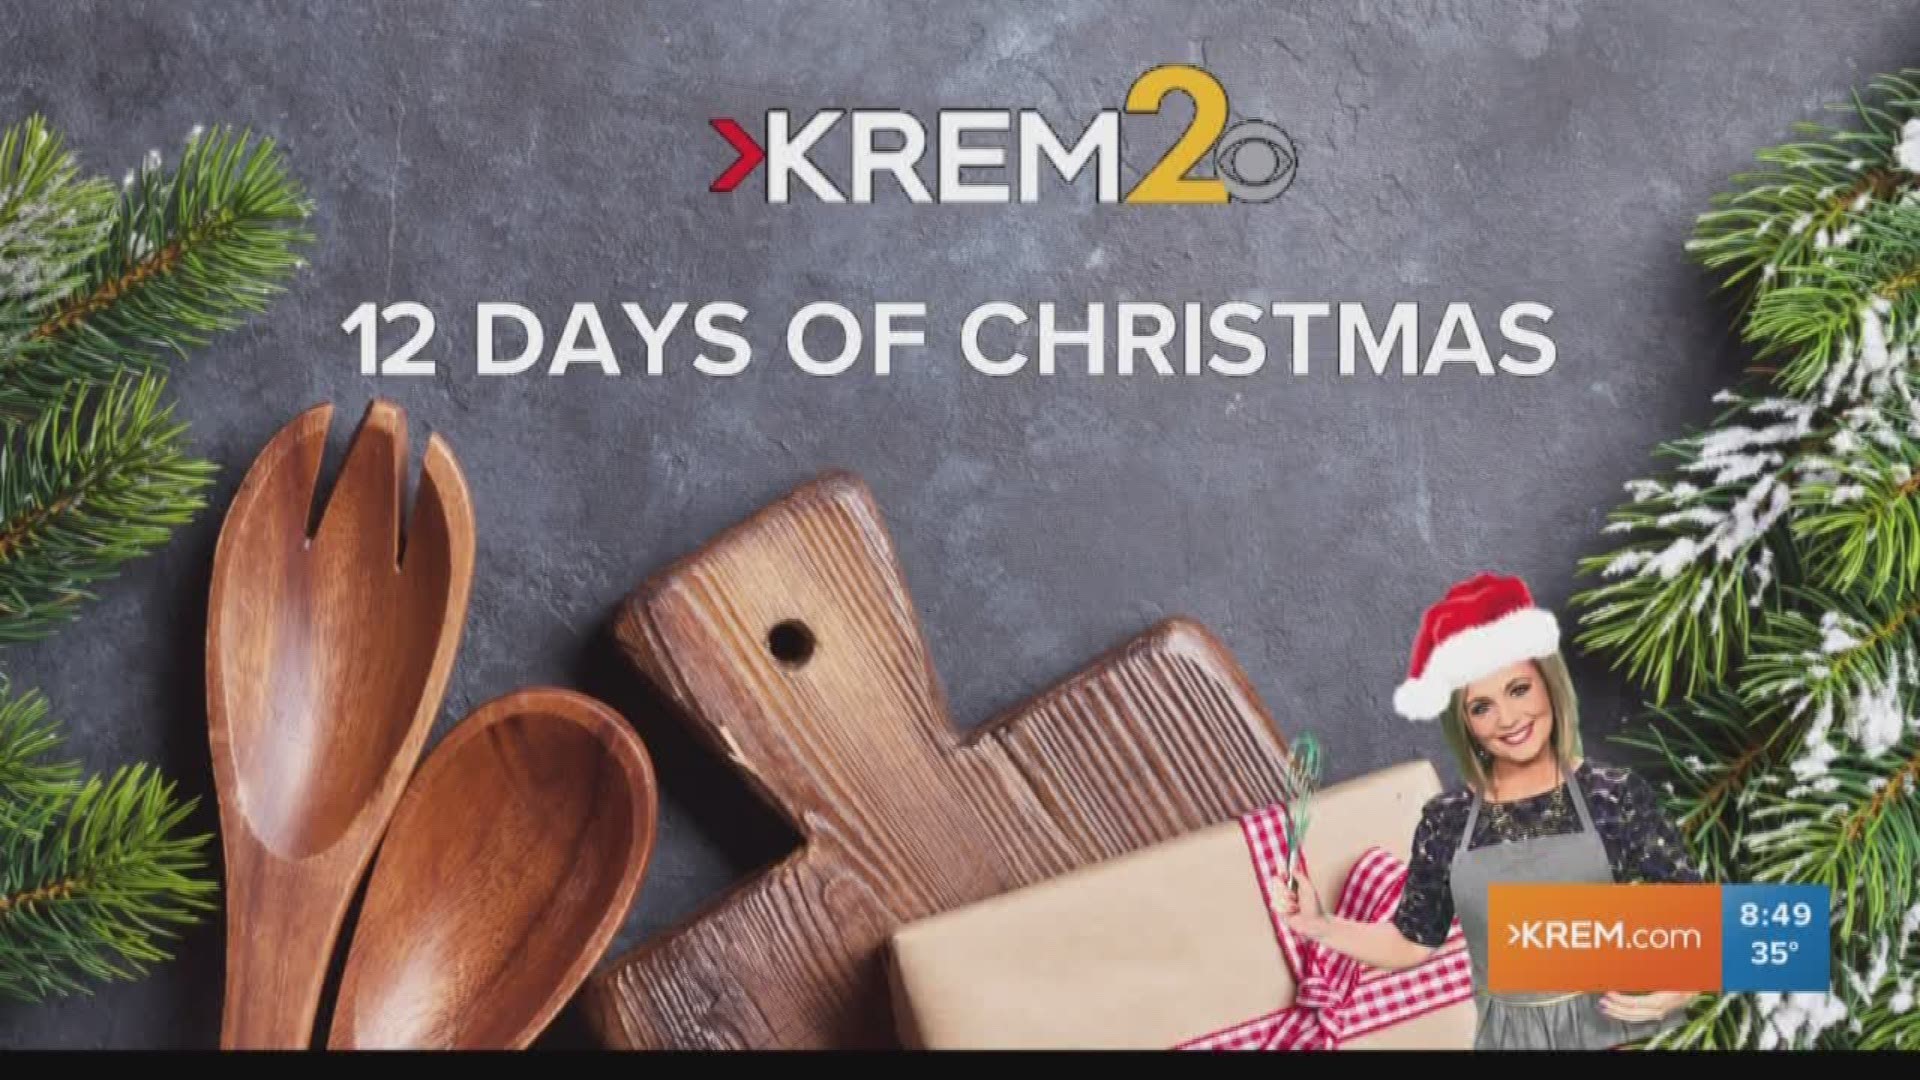 Brittany Bailey and Evan Noorani frost and taste delicious cherry jubilee cookies for KREM's 12 Days of Christmas.